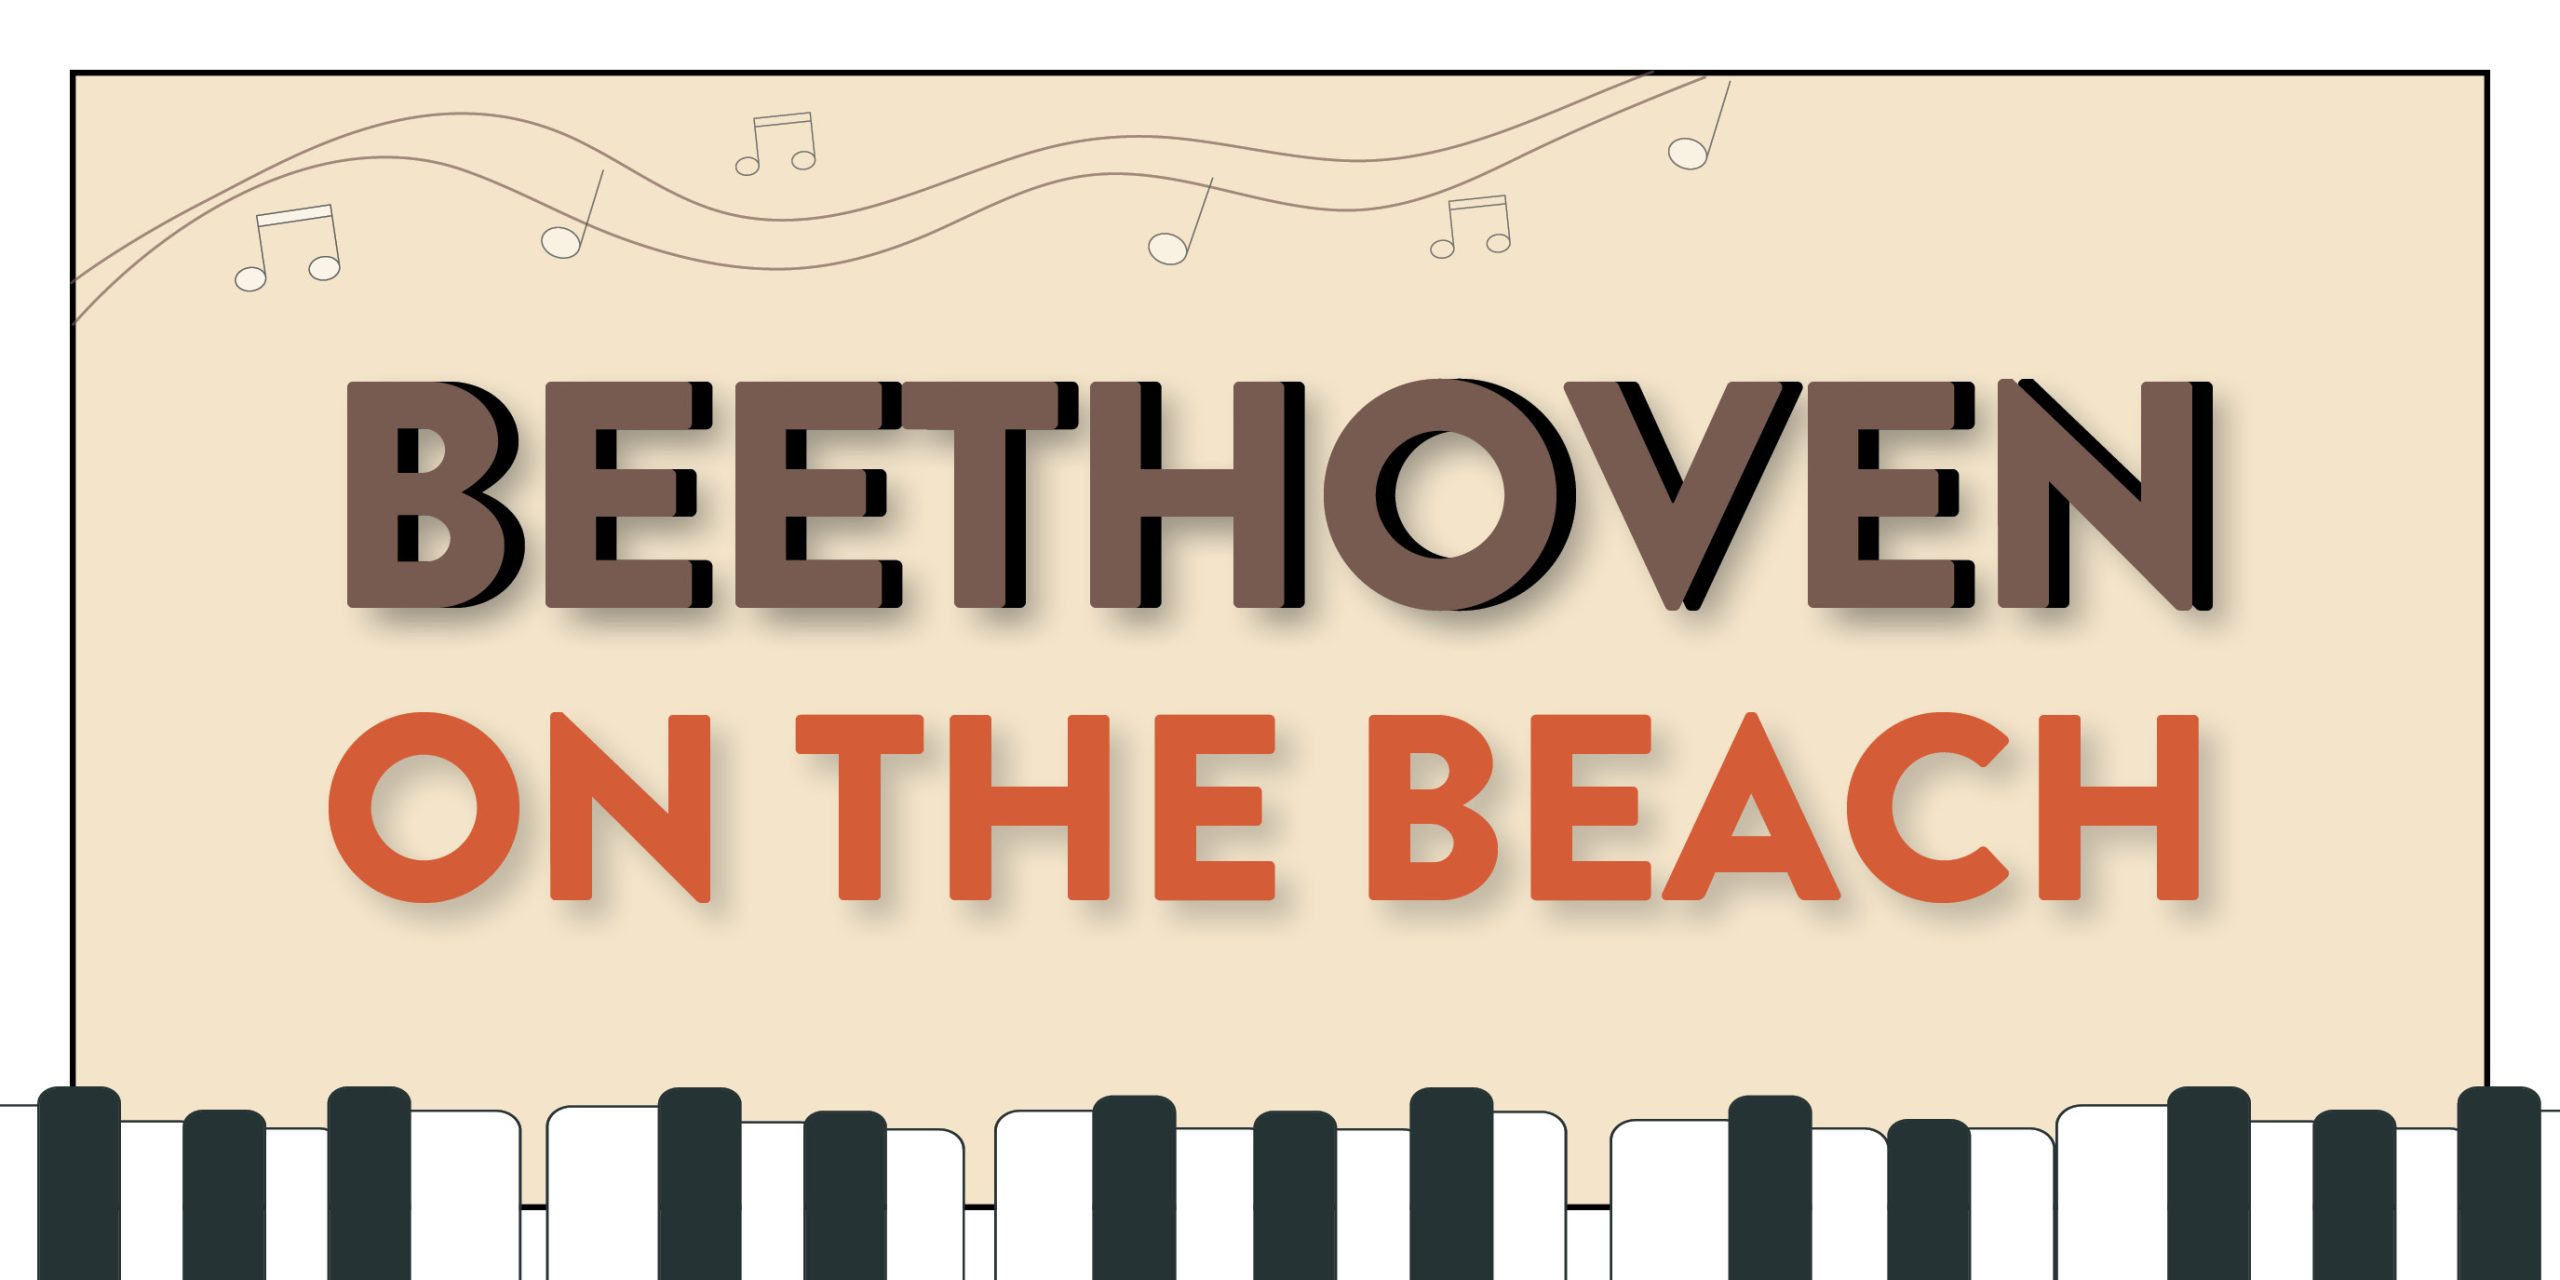 Beethoven on the Beach